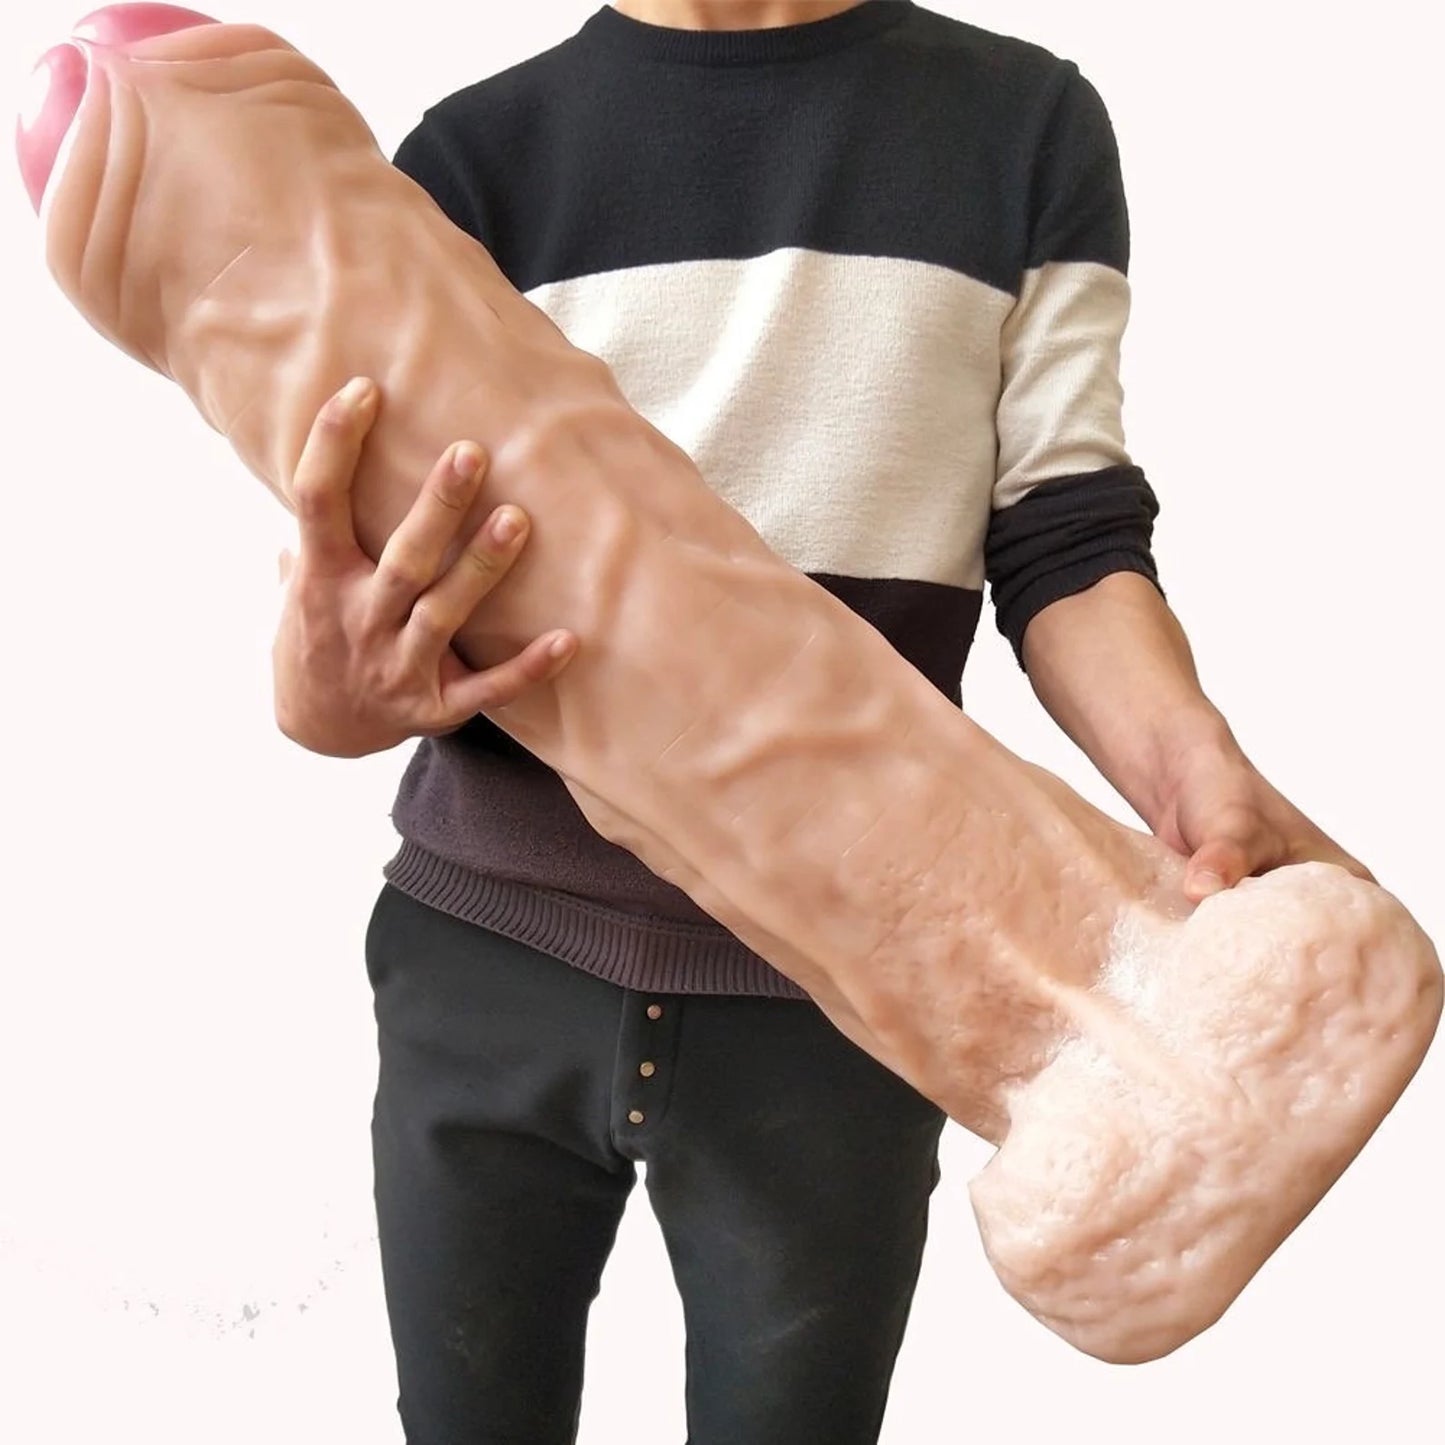 The Biggest Dildo in the World